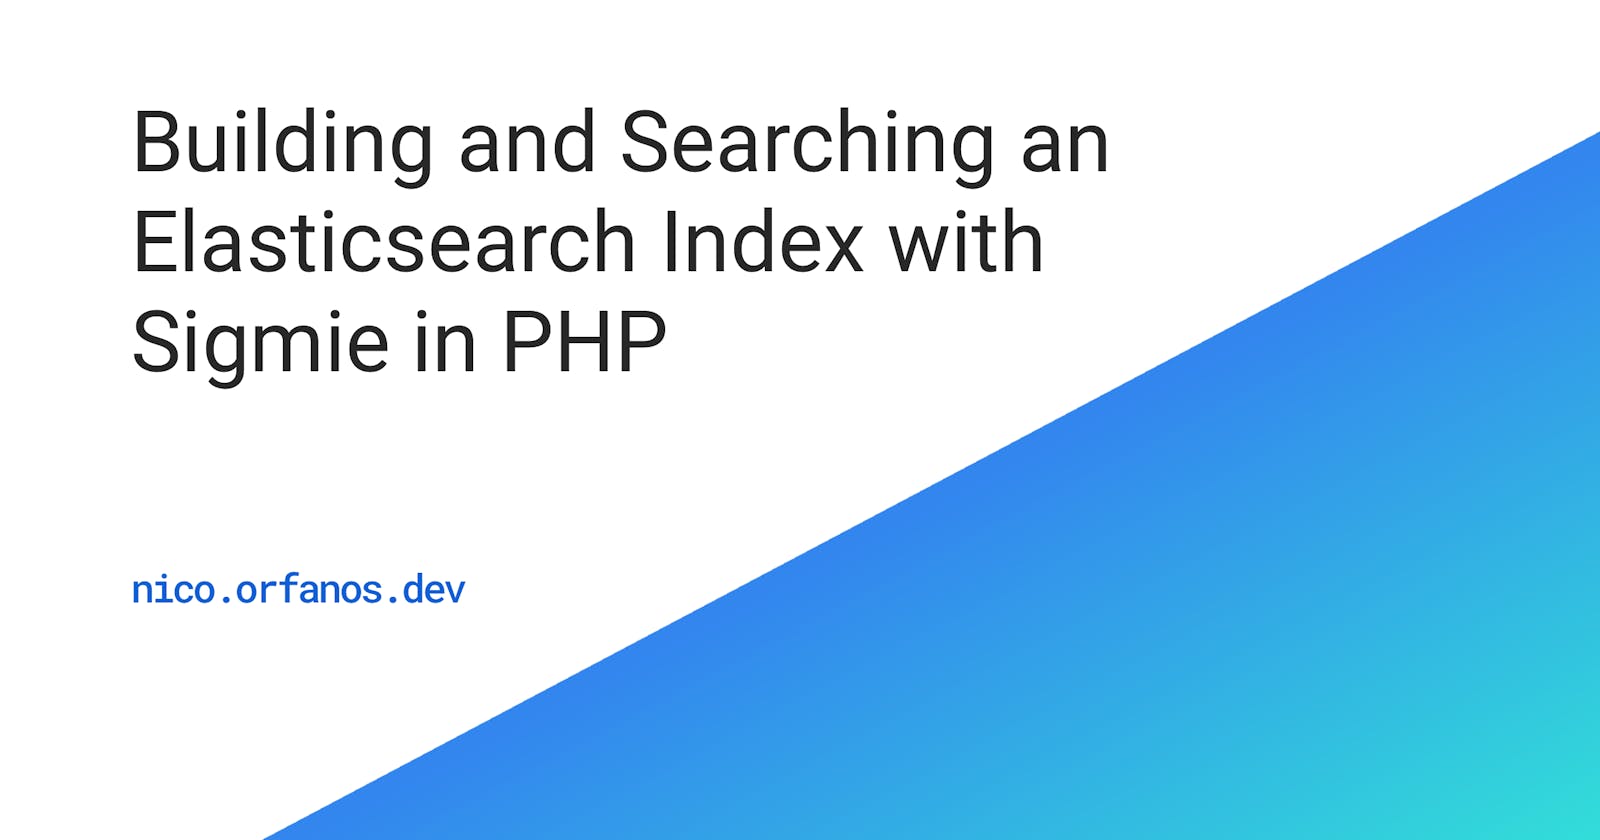 Building and Searching an Elasticsearch Index with Sigmie in PHP